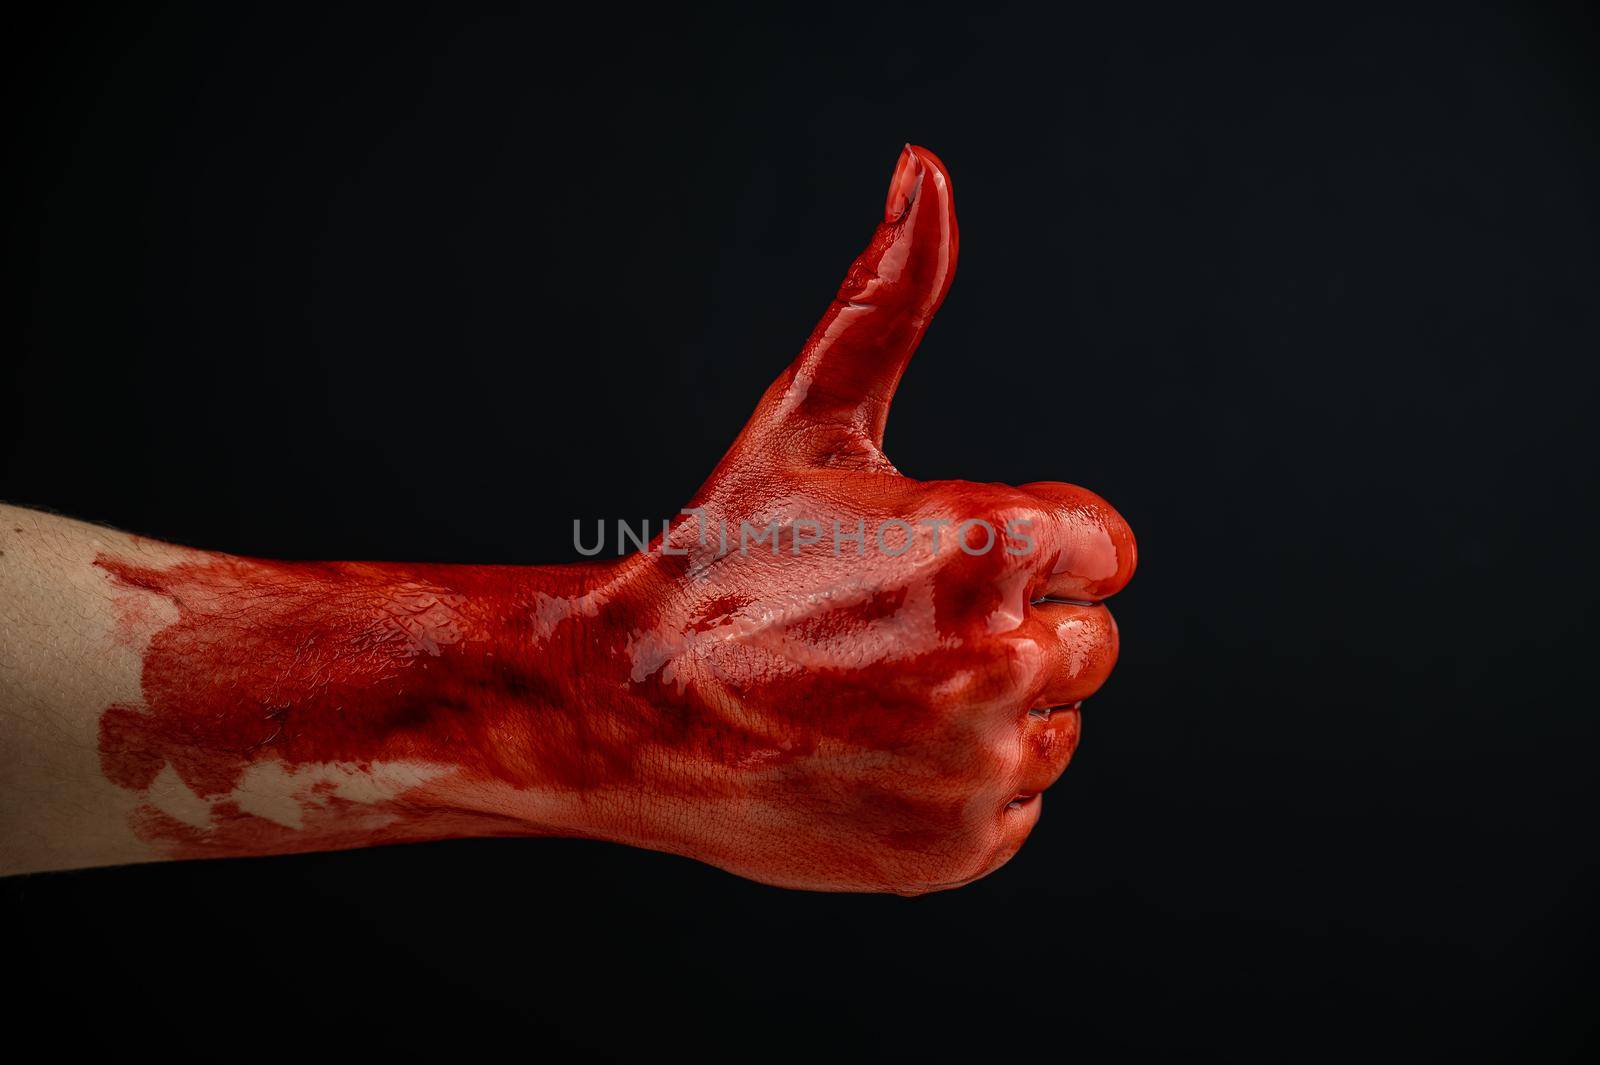 A woman's hand stained with blood shows a thumbs up on a black background. by mrwed54